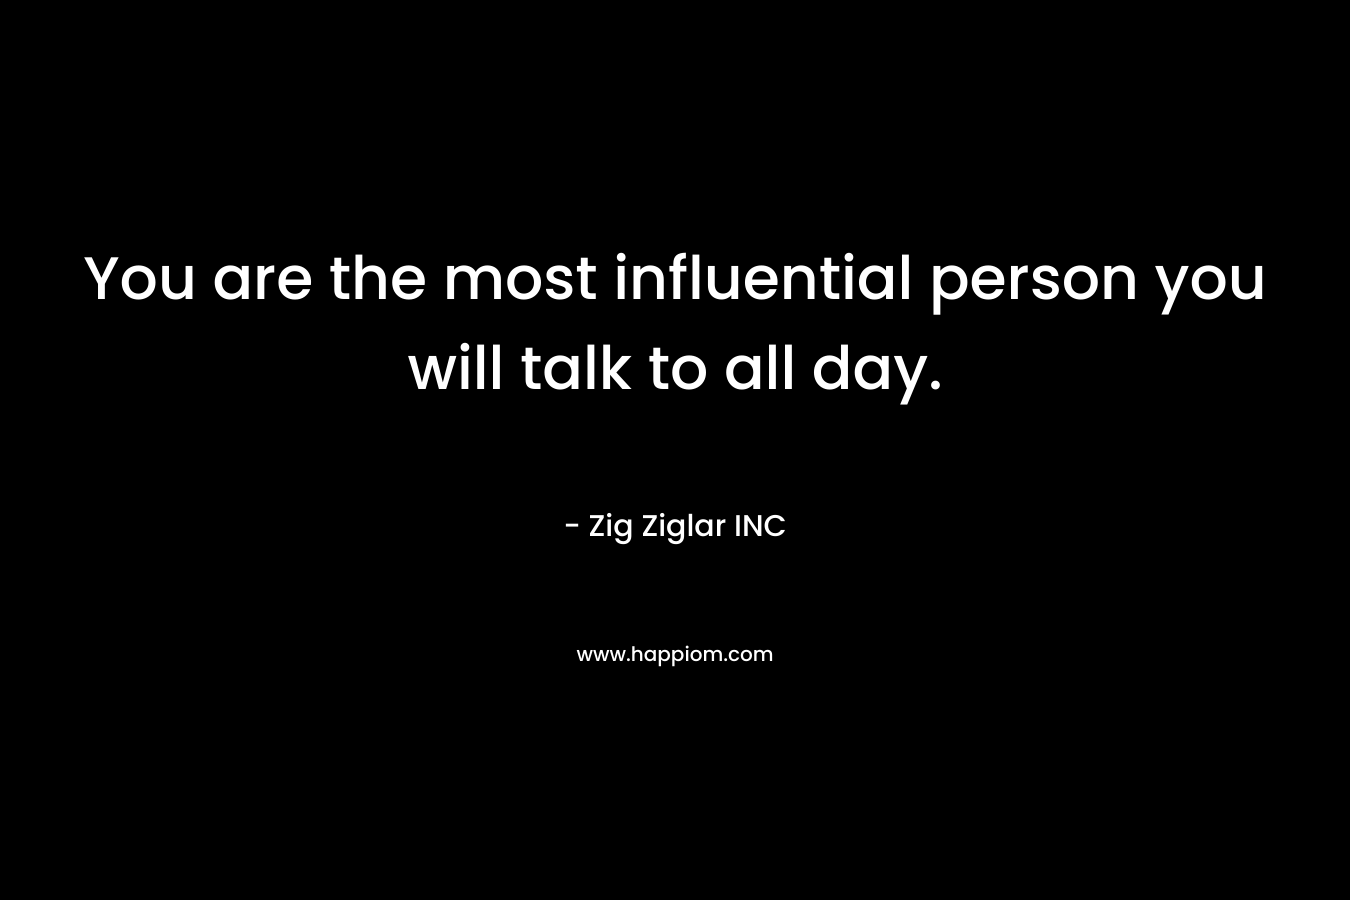 You are the most influential person you will talk to all day.